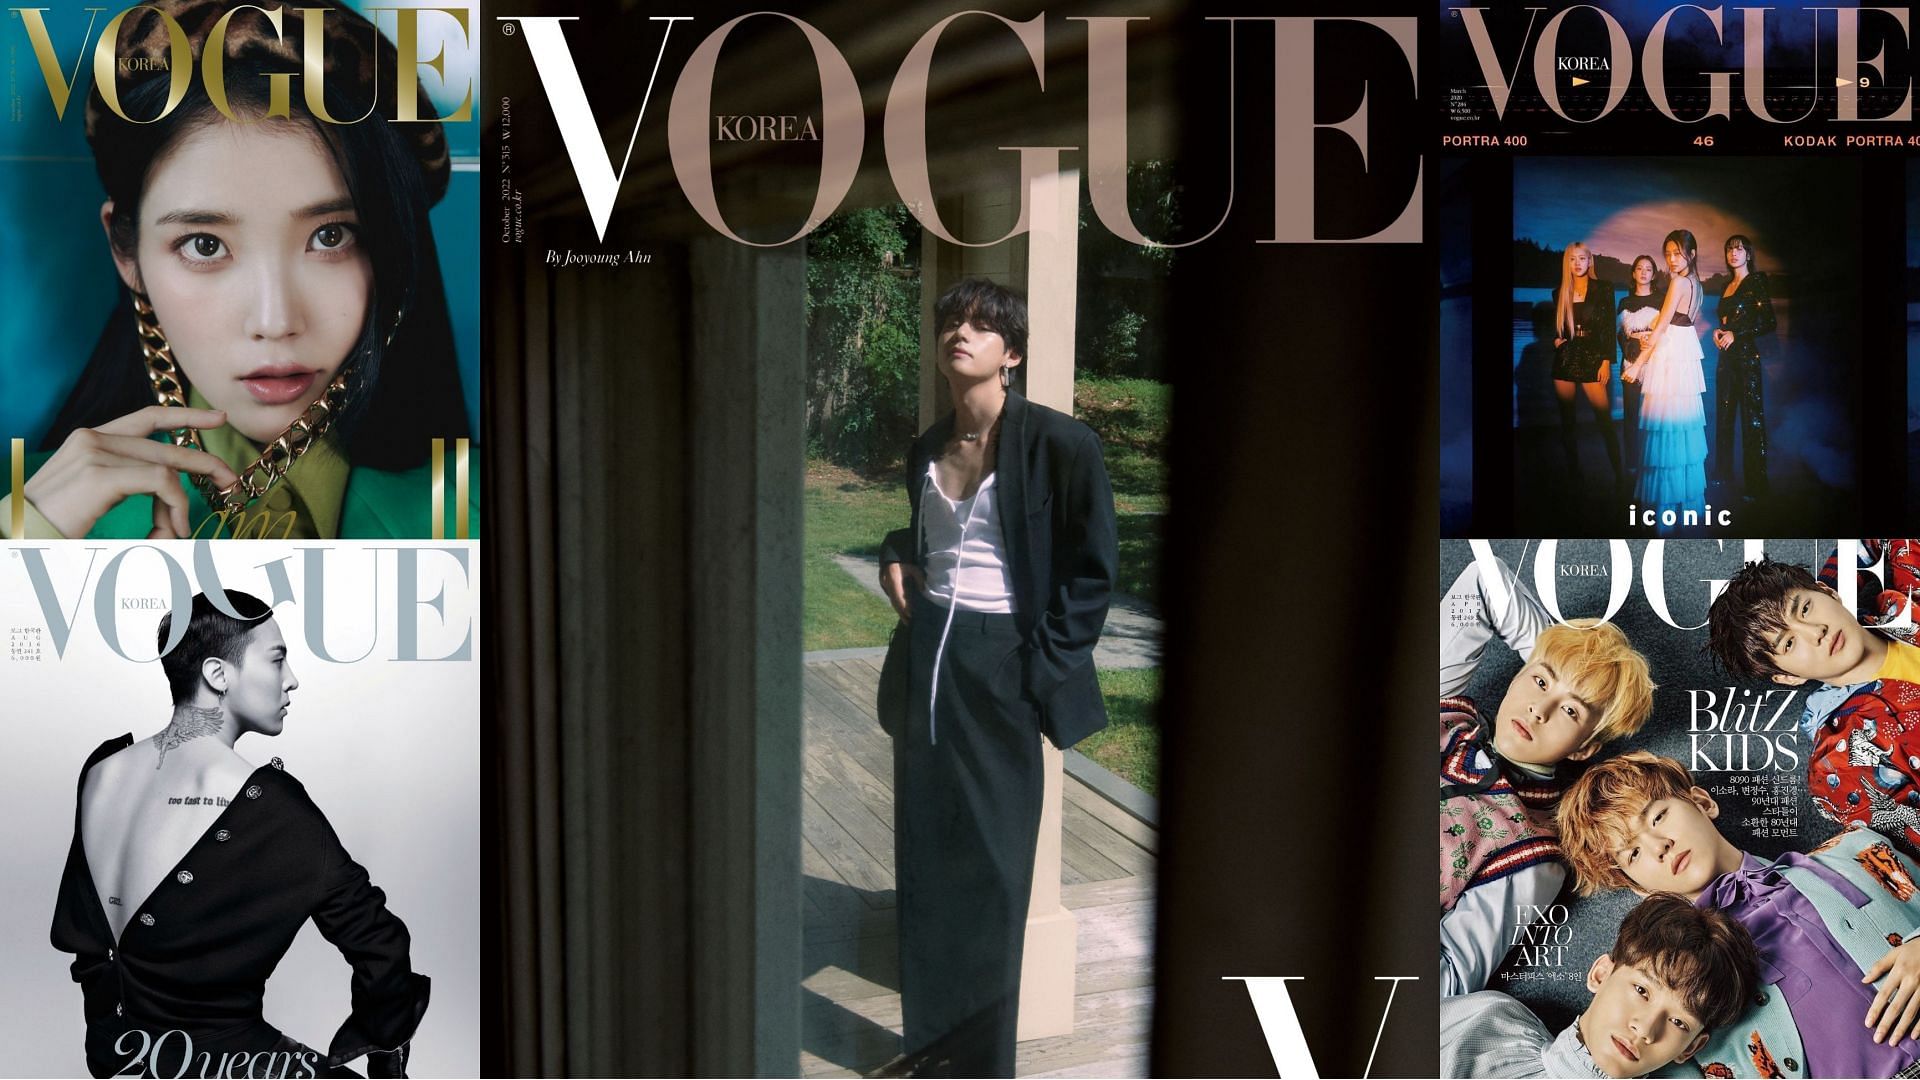 Kang Daniel is the Cover Boy of Vogue Korea September 2019 Issue